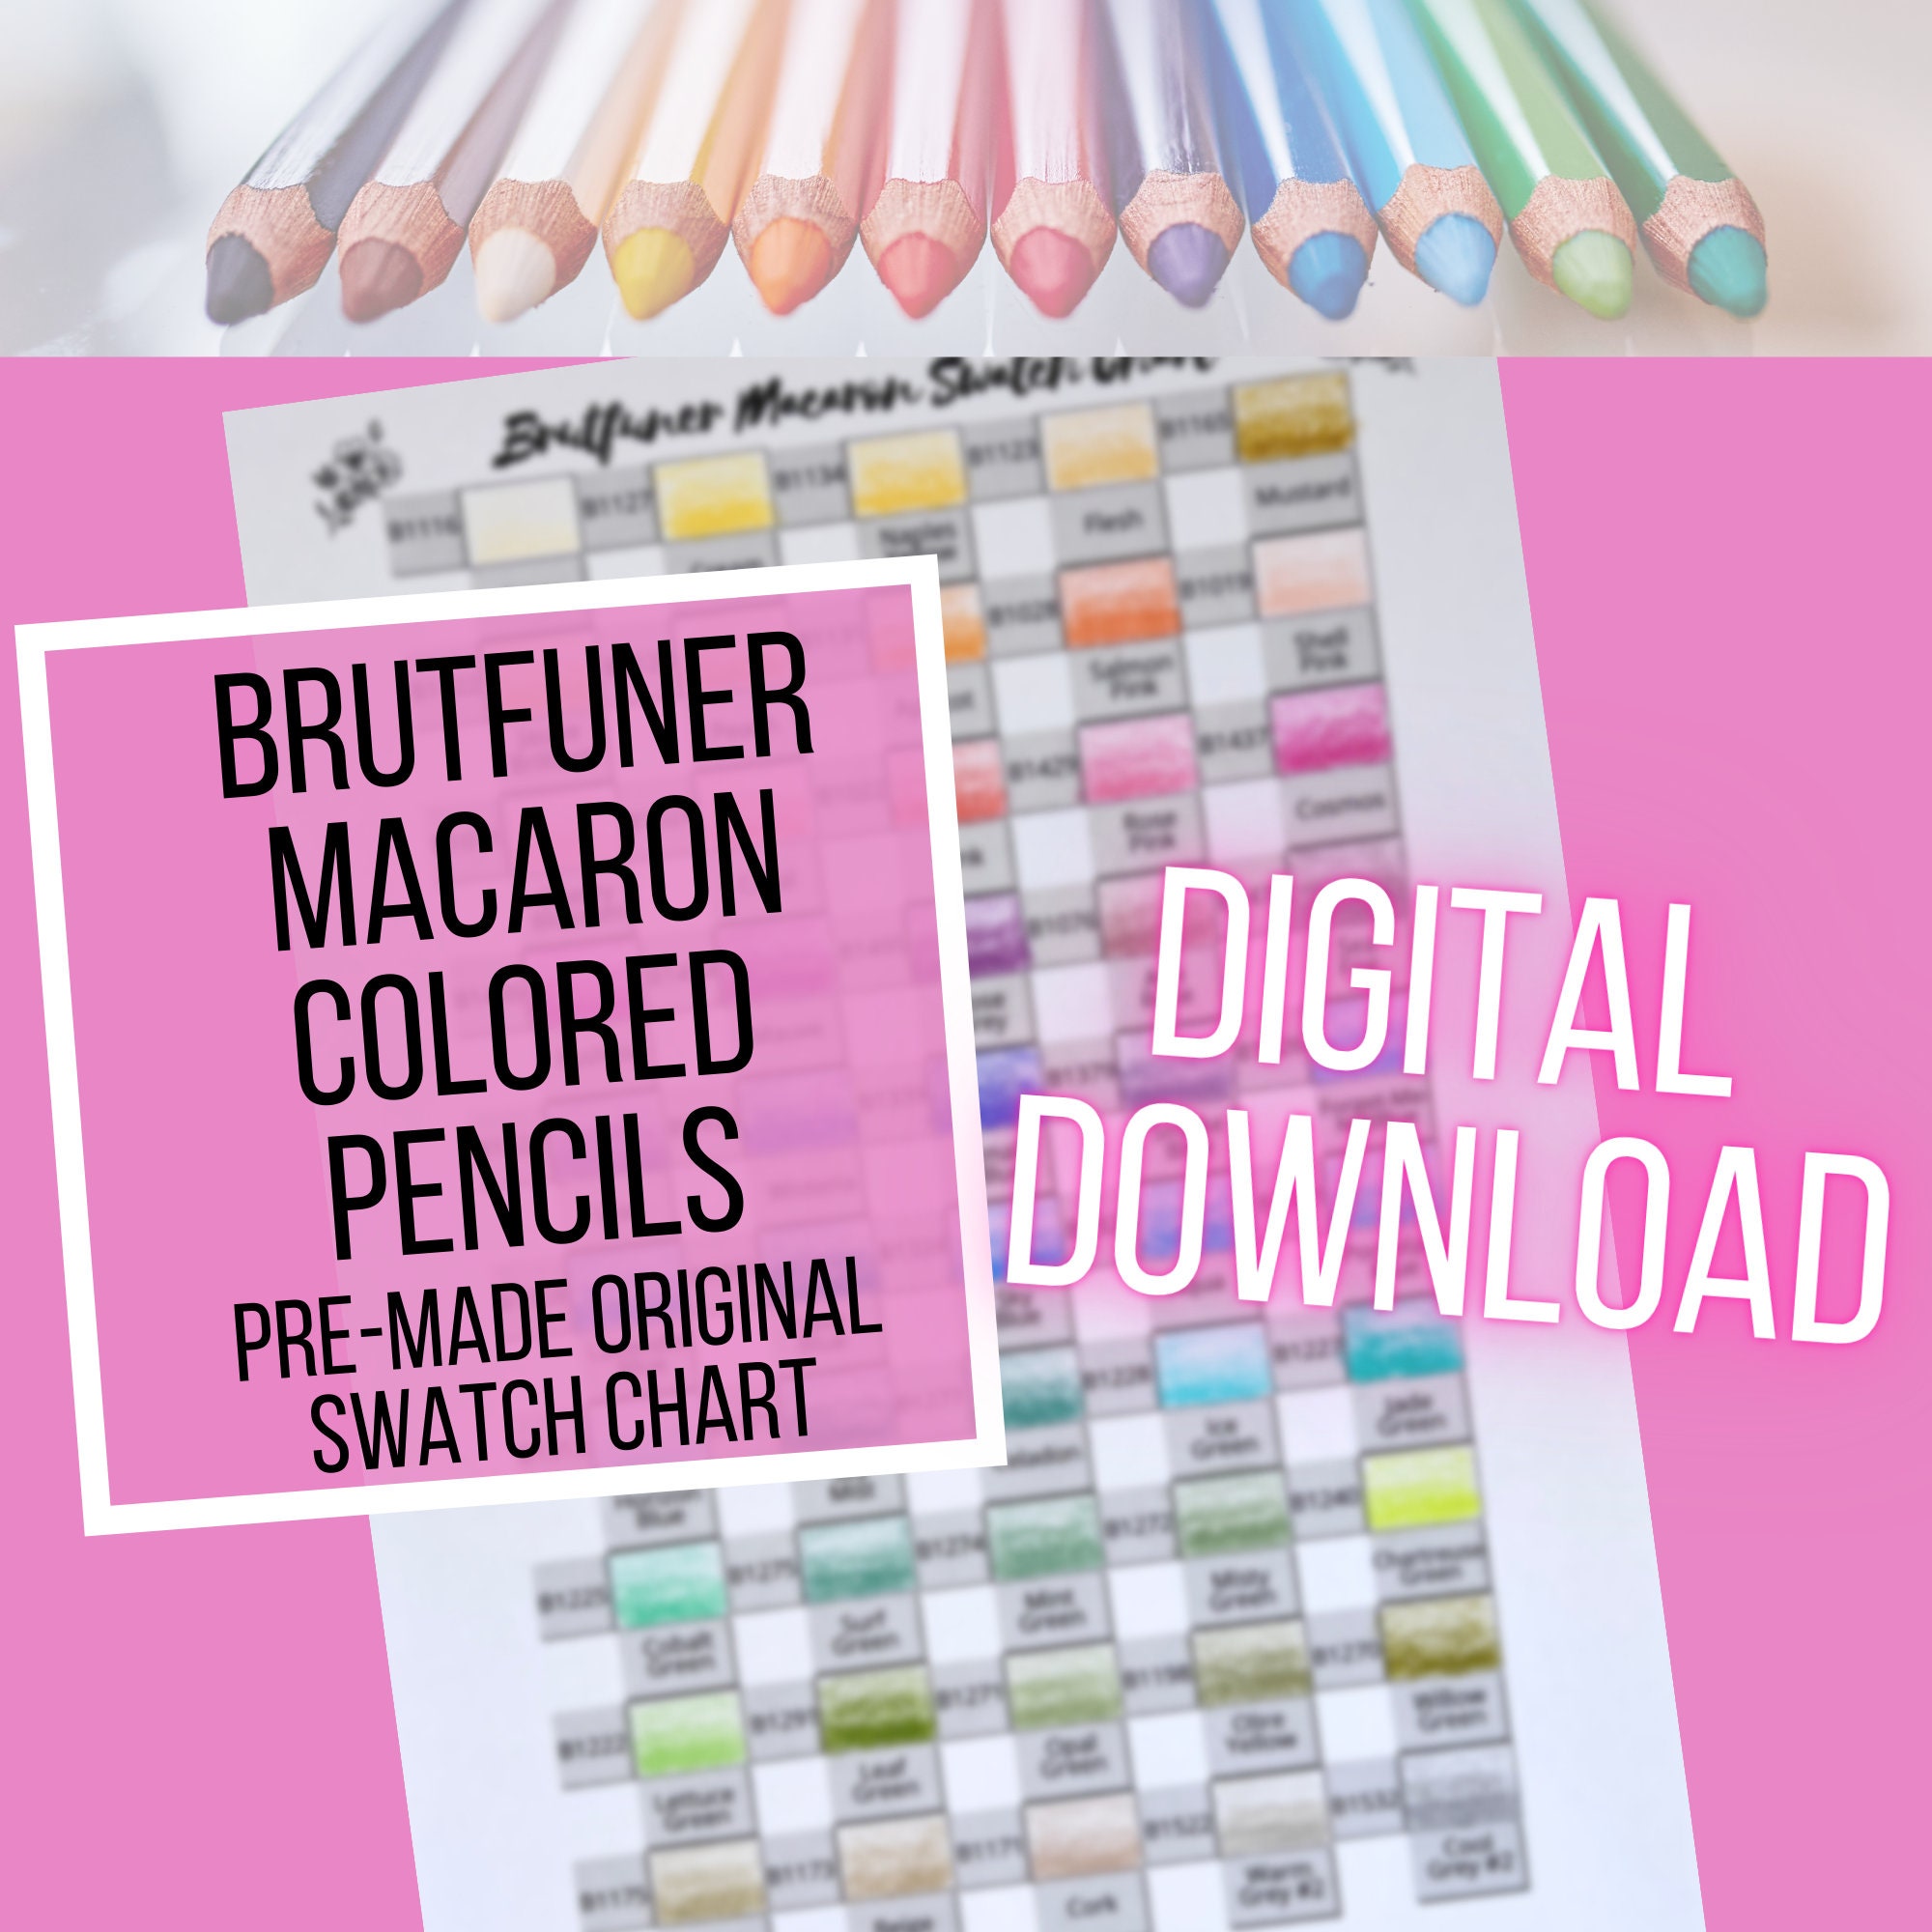 Brutfuner Macaron Colored Pencils - Pre-Made Original Swatch Chart in My  Color Family Order